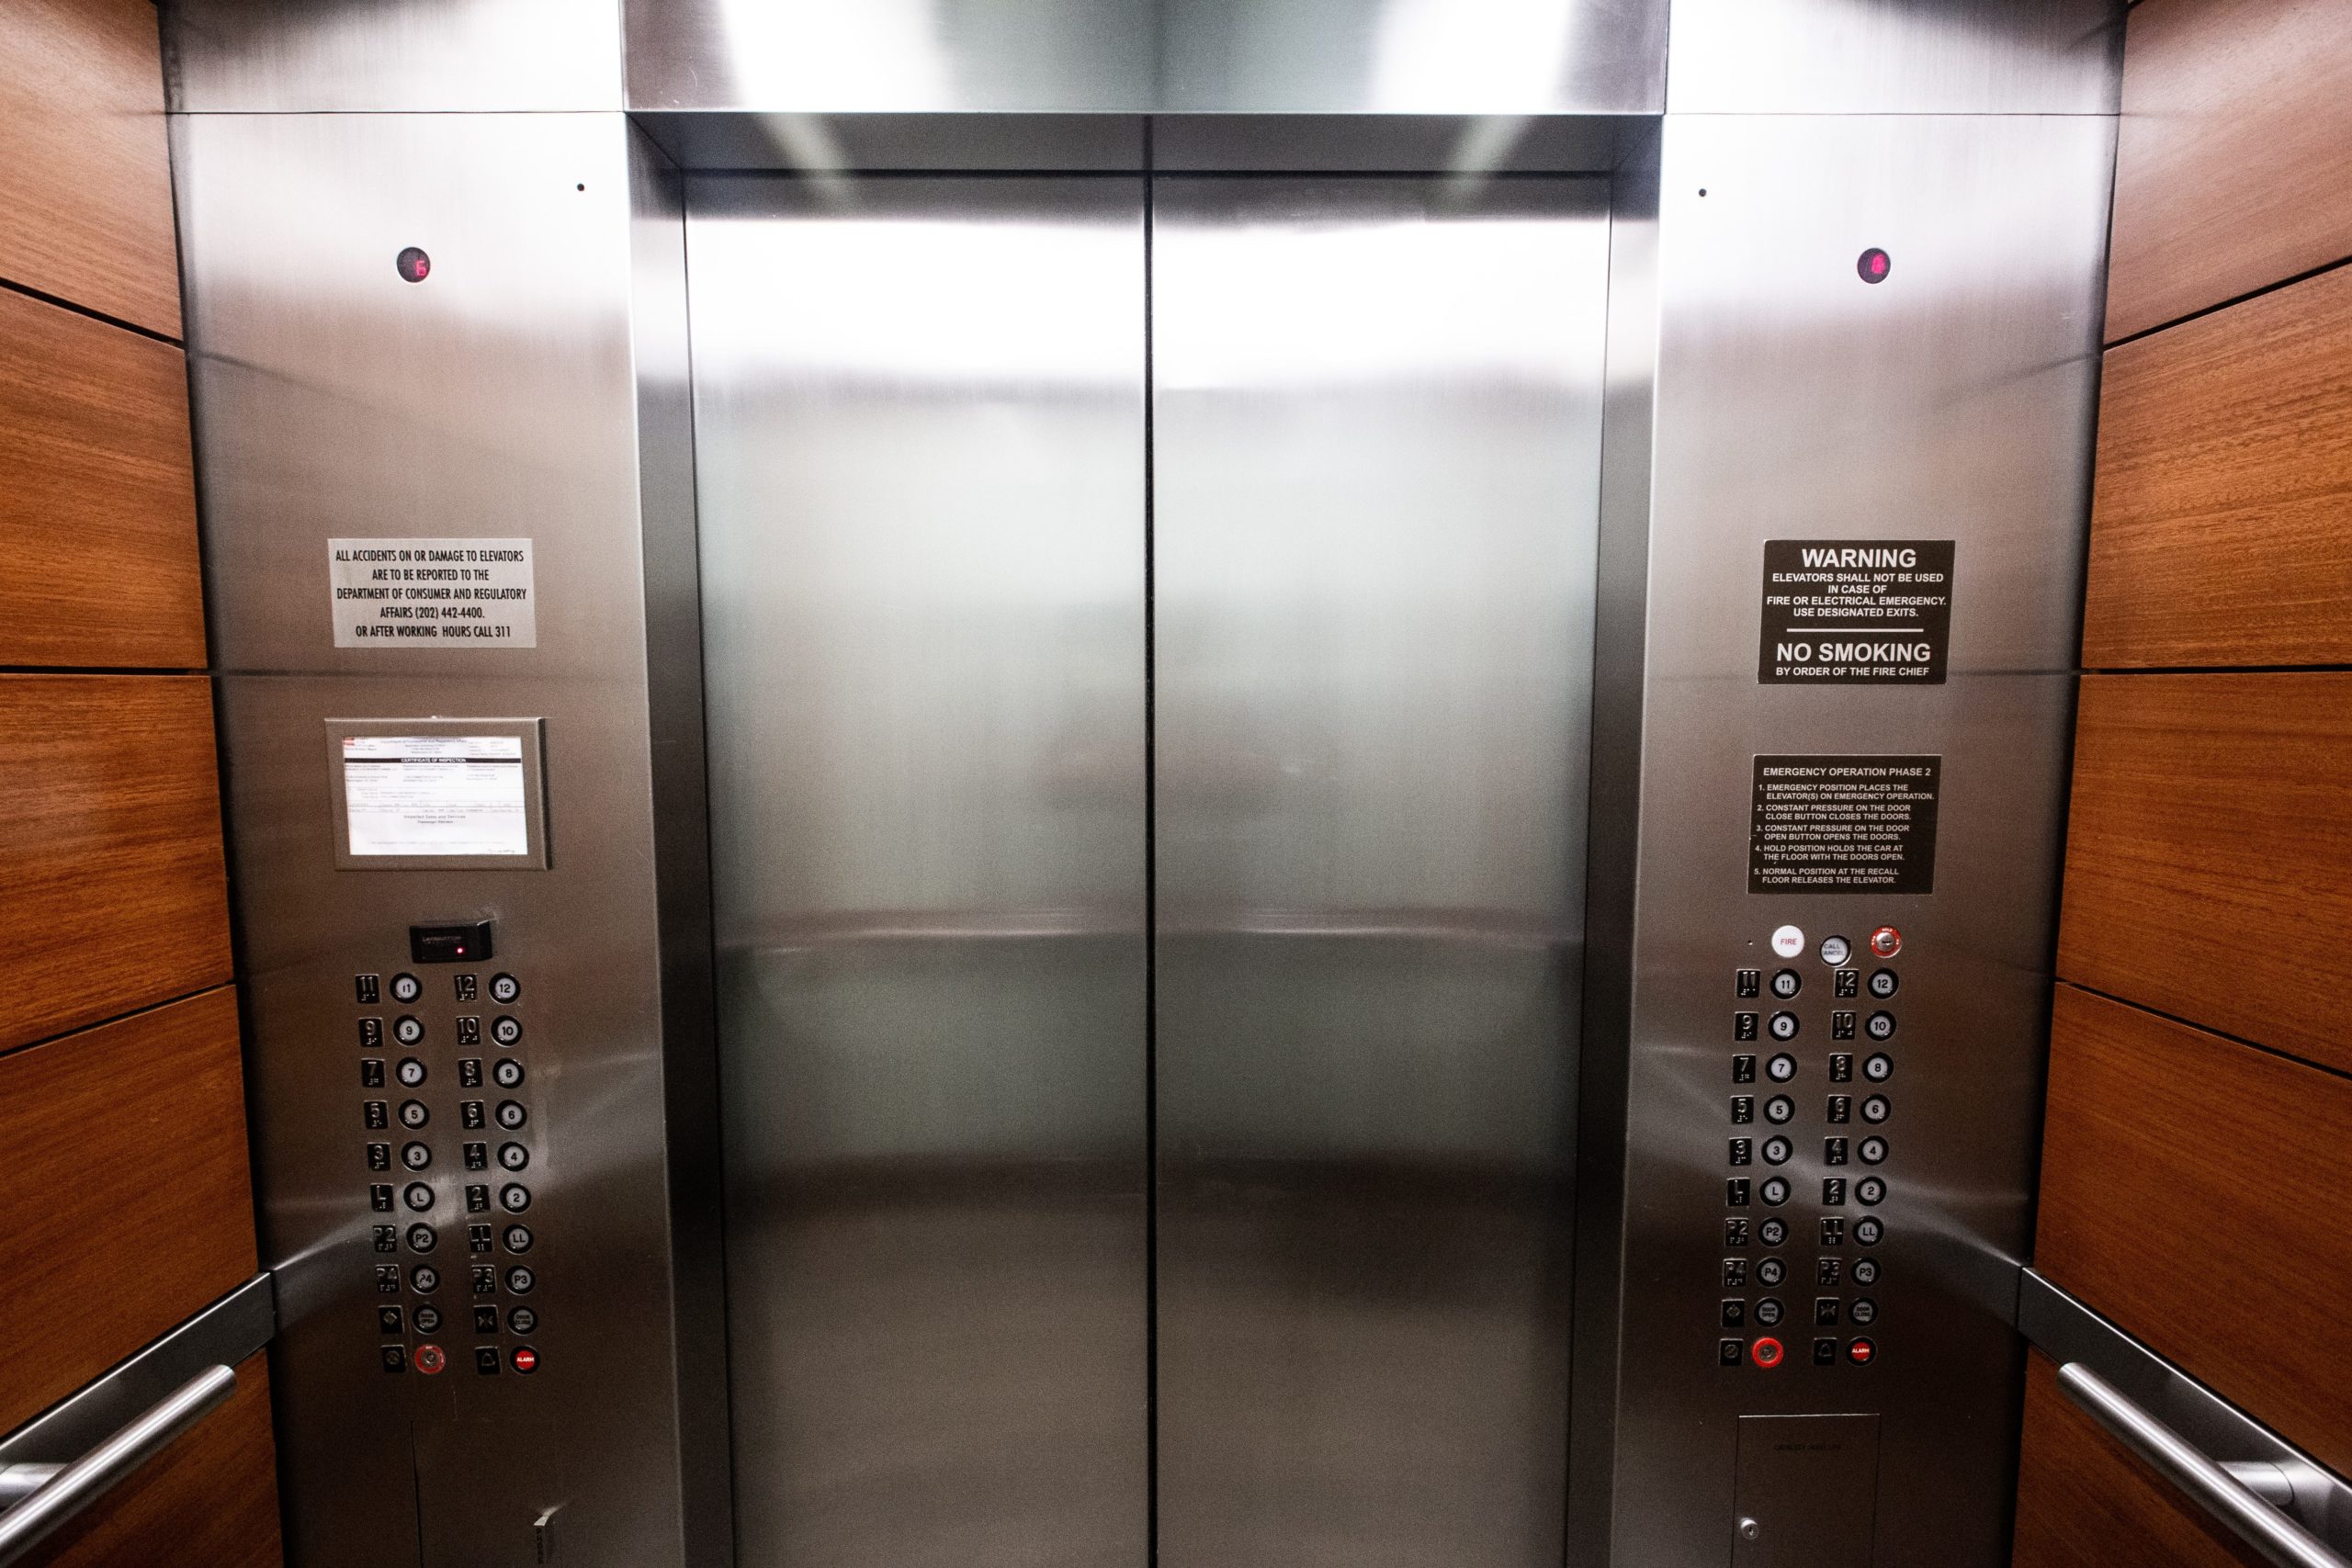 Elevator Power Consumption - Types, Standby Power, and Electricity Bills